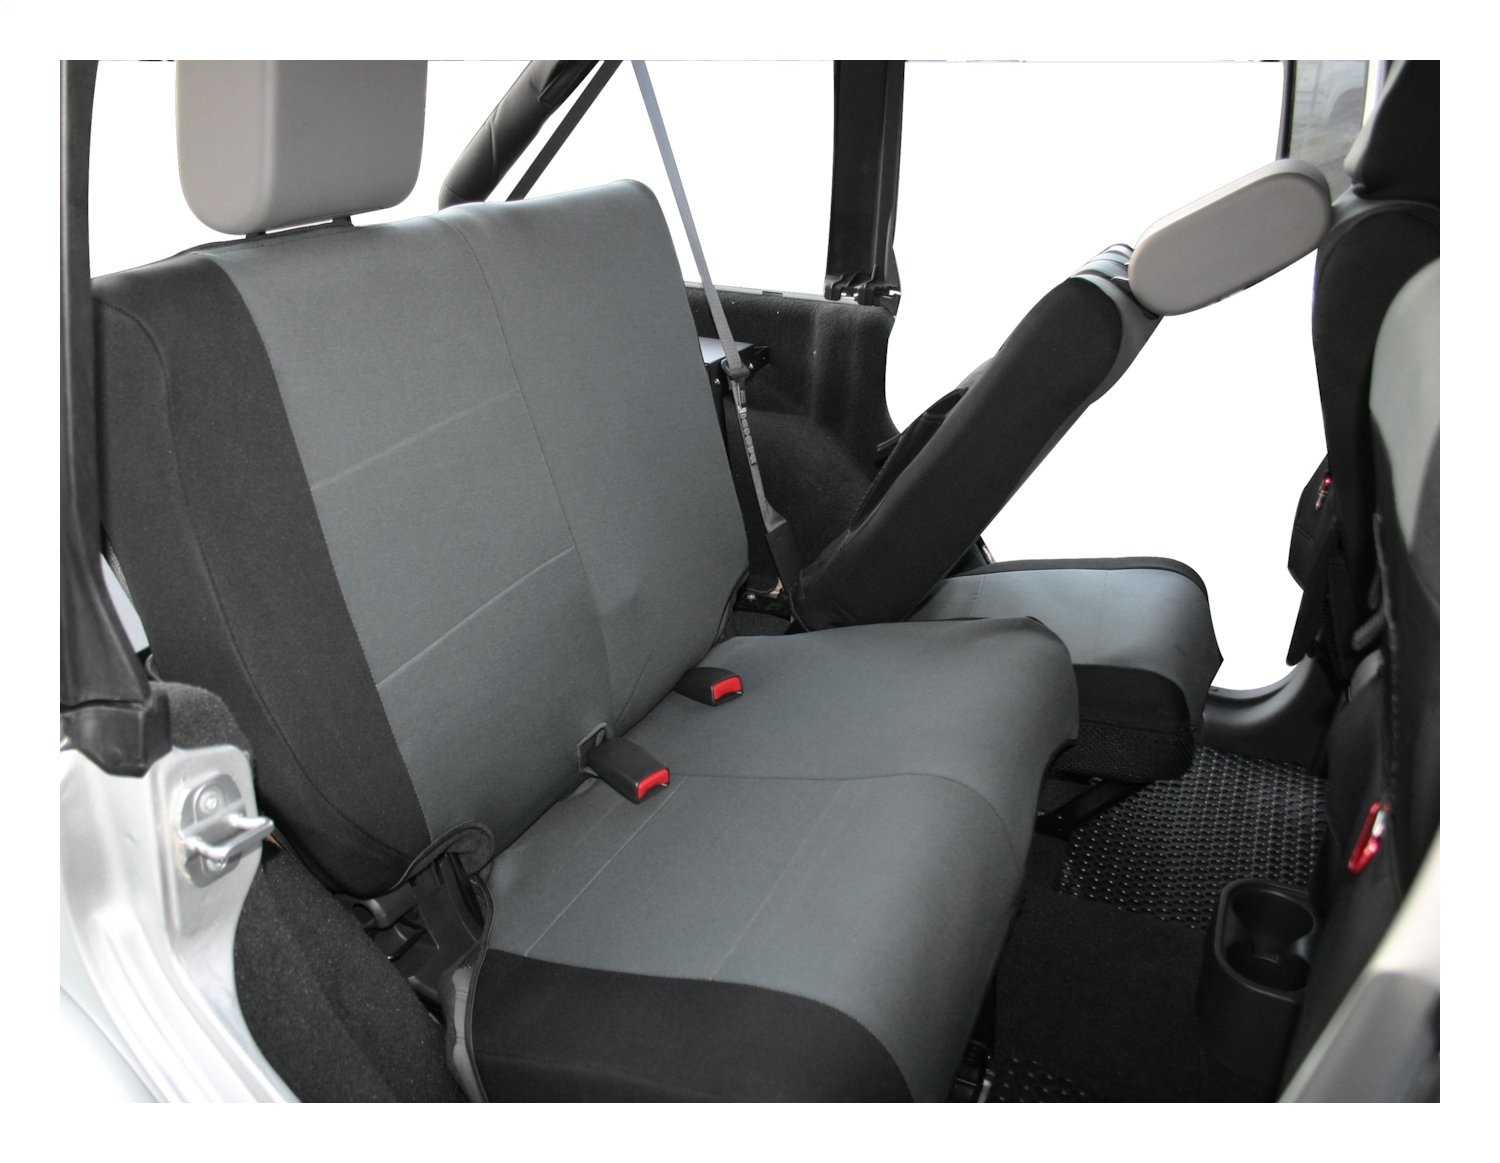 RT Off-Road Rear Polycanvas Seat Cover for 07-11 JK Wrangler w 4 Dr Black/Gray